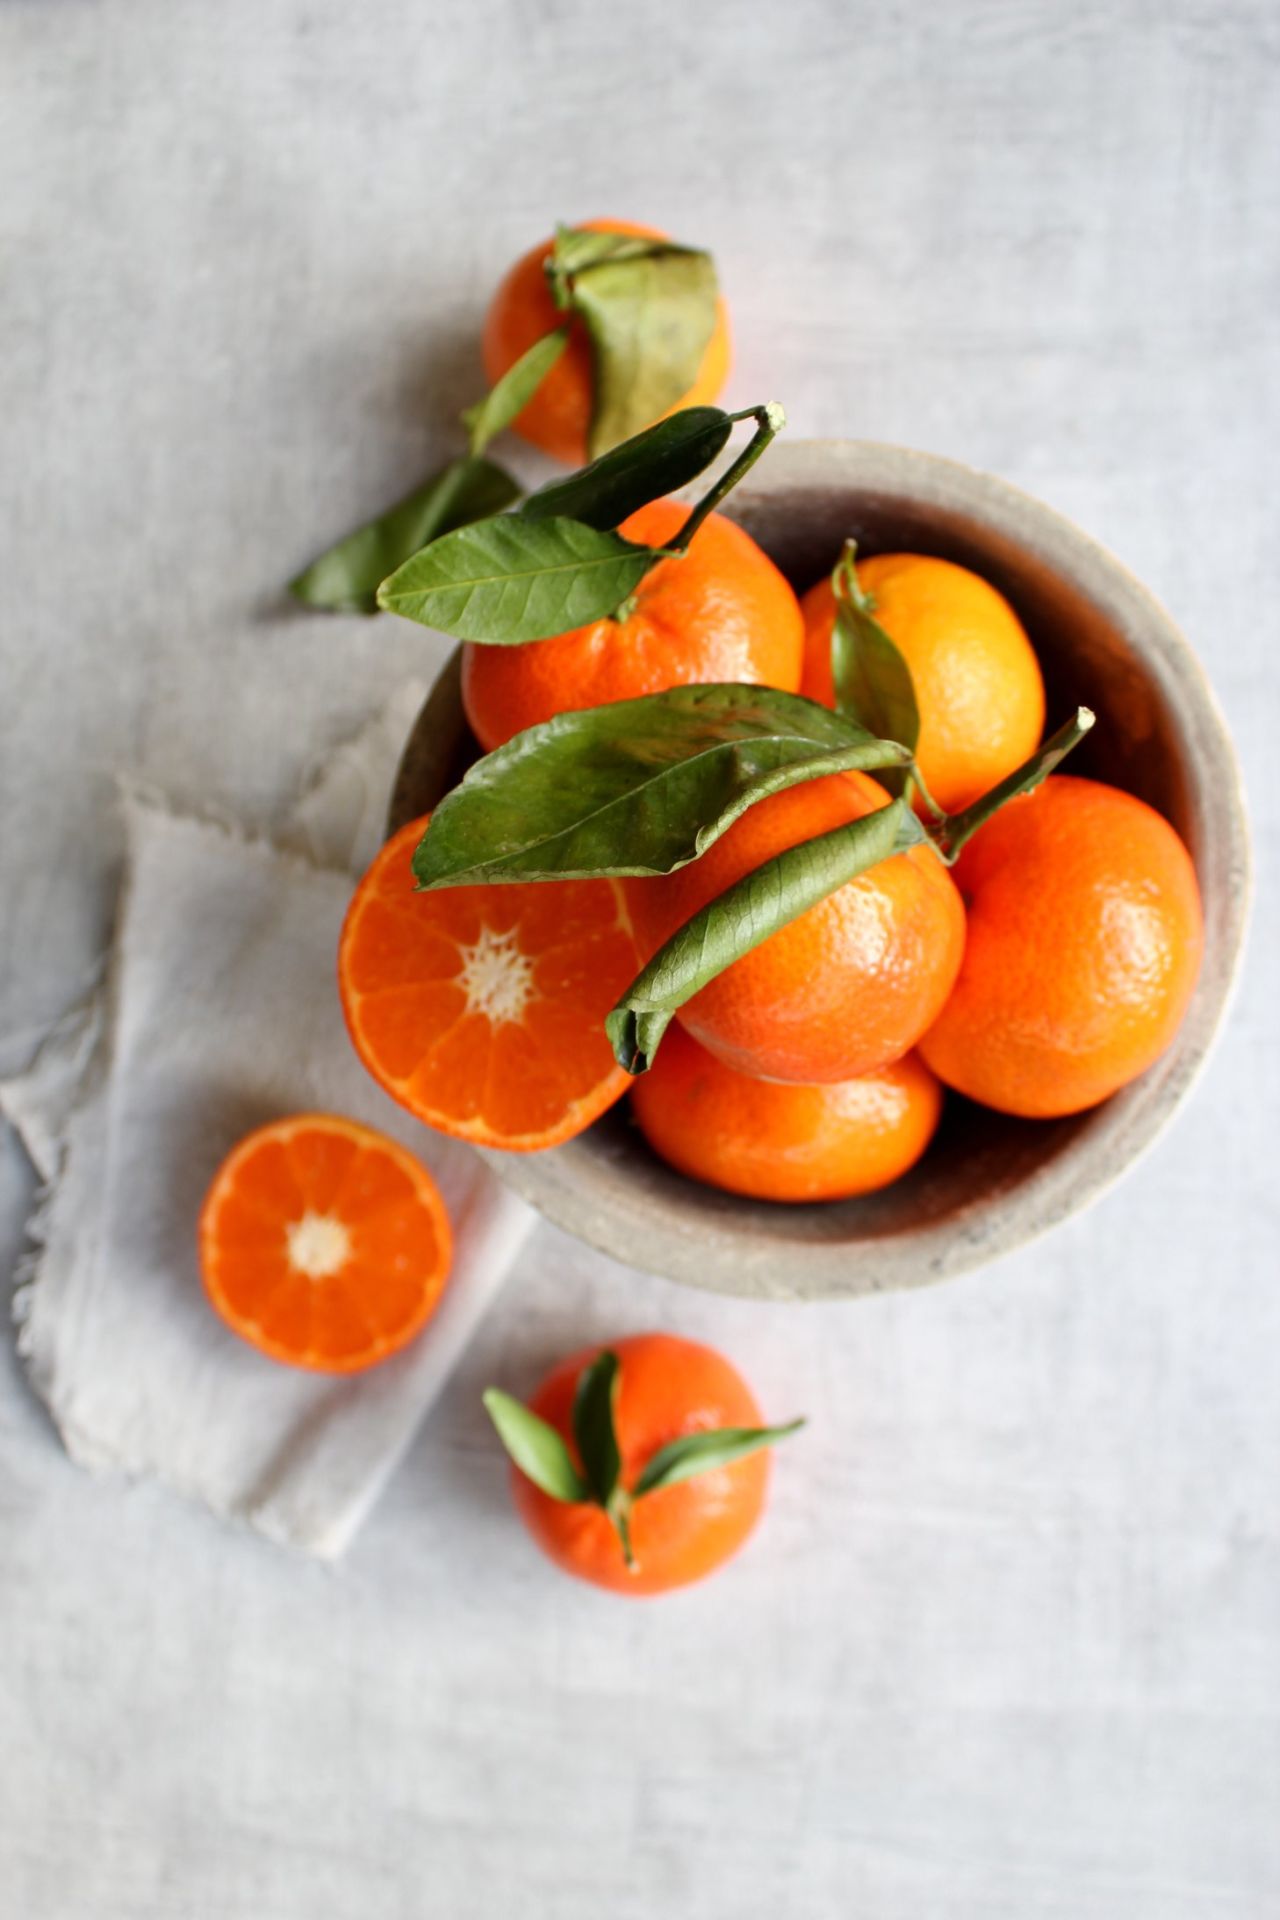 <strong>Tangerines:</strong> The small and sweet citrus fruits are positively refreshing for fall recipes. Our favorite flavor combos include almonds, dates and honey. Juice them with oil, vinegar and ginger for a to-die-for dressing. <br /><br />Health benefits include<br />• Good source of vitamin C <br />• Good source of beta-carotene <br /><br />Harvest season: November to April